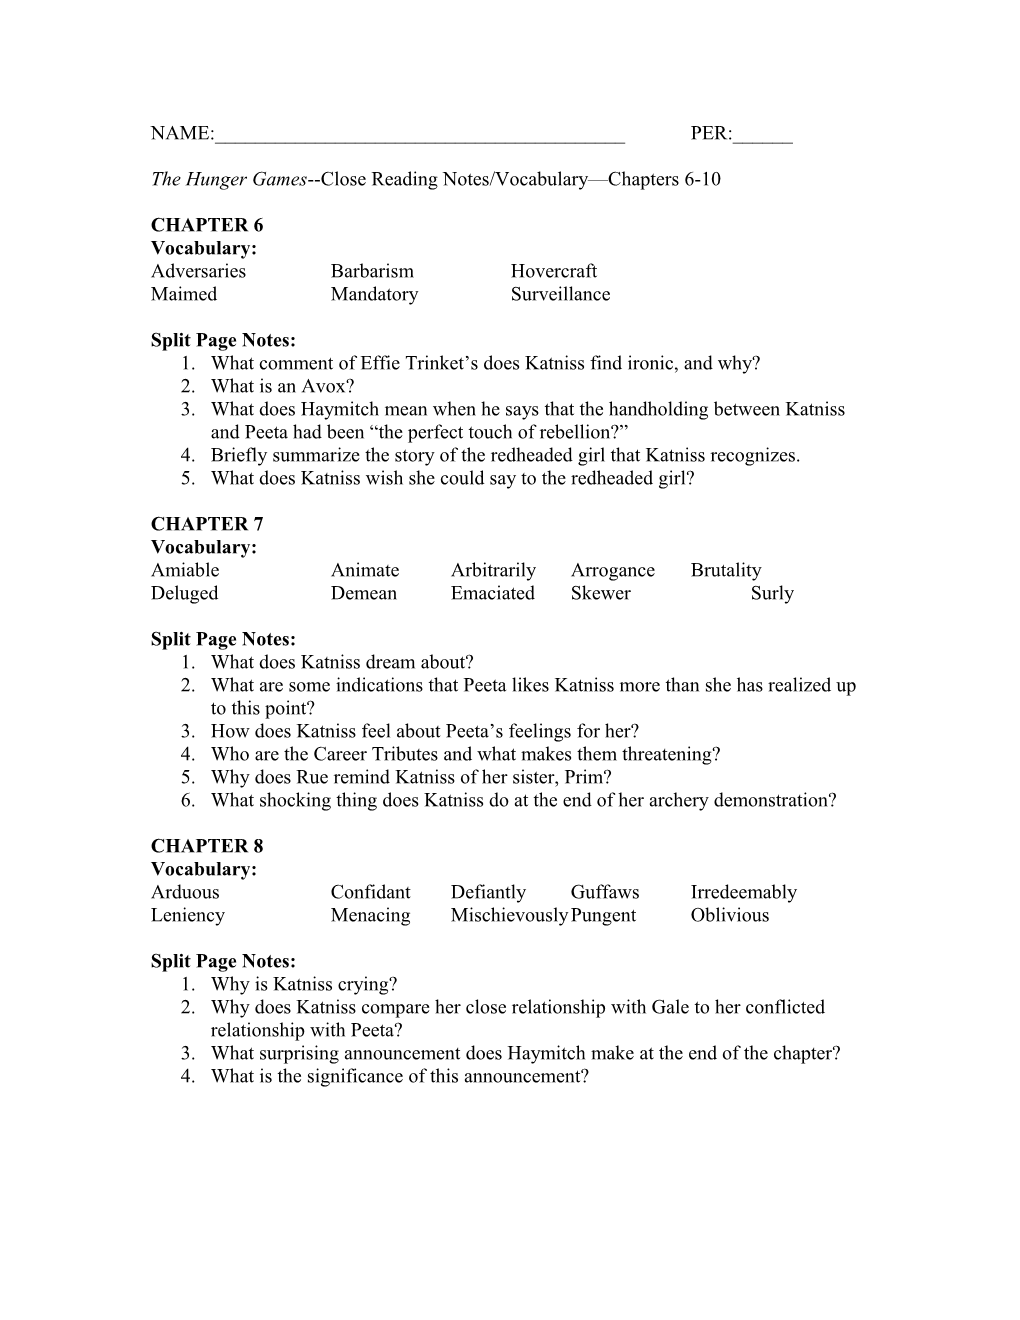 The Hunger Games Close Reading Notes/Vocabulary Chapters 6-10